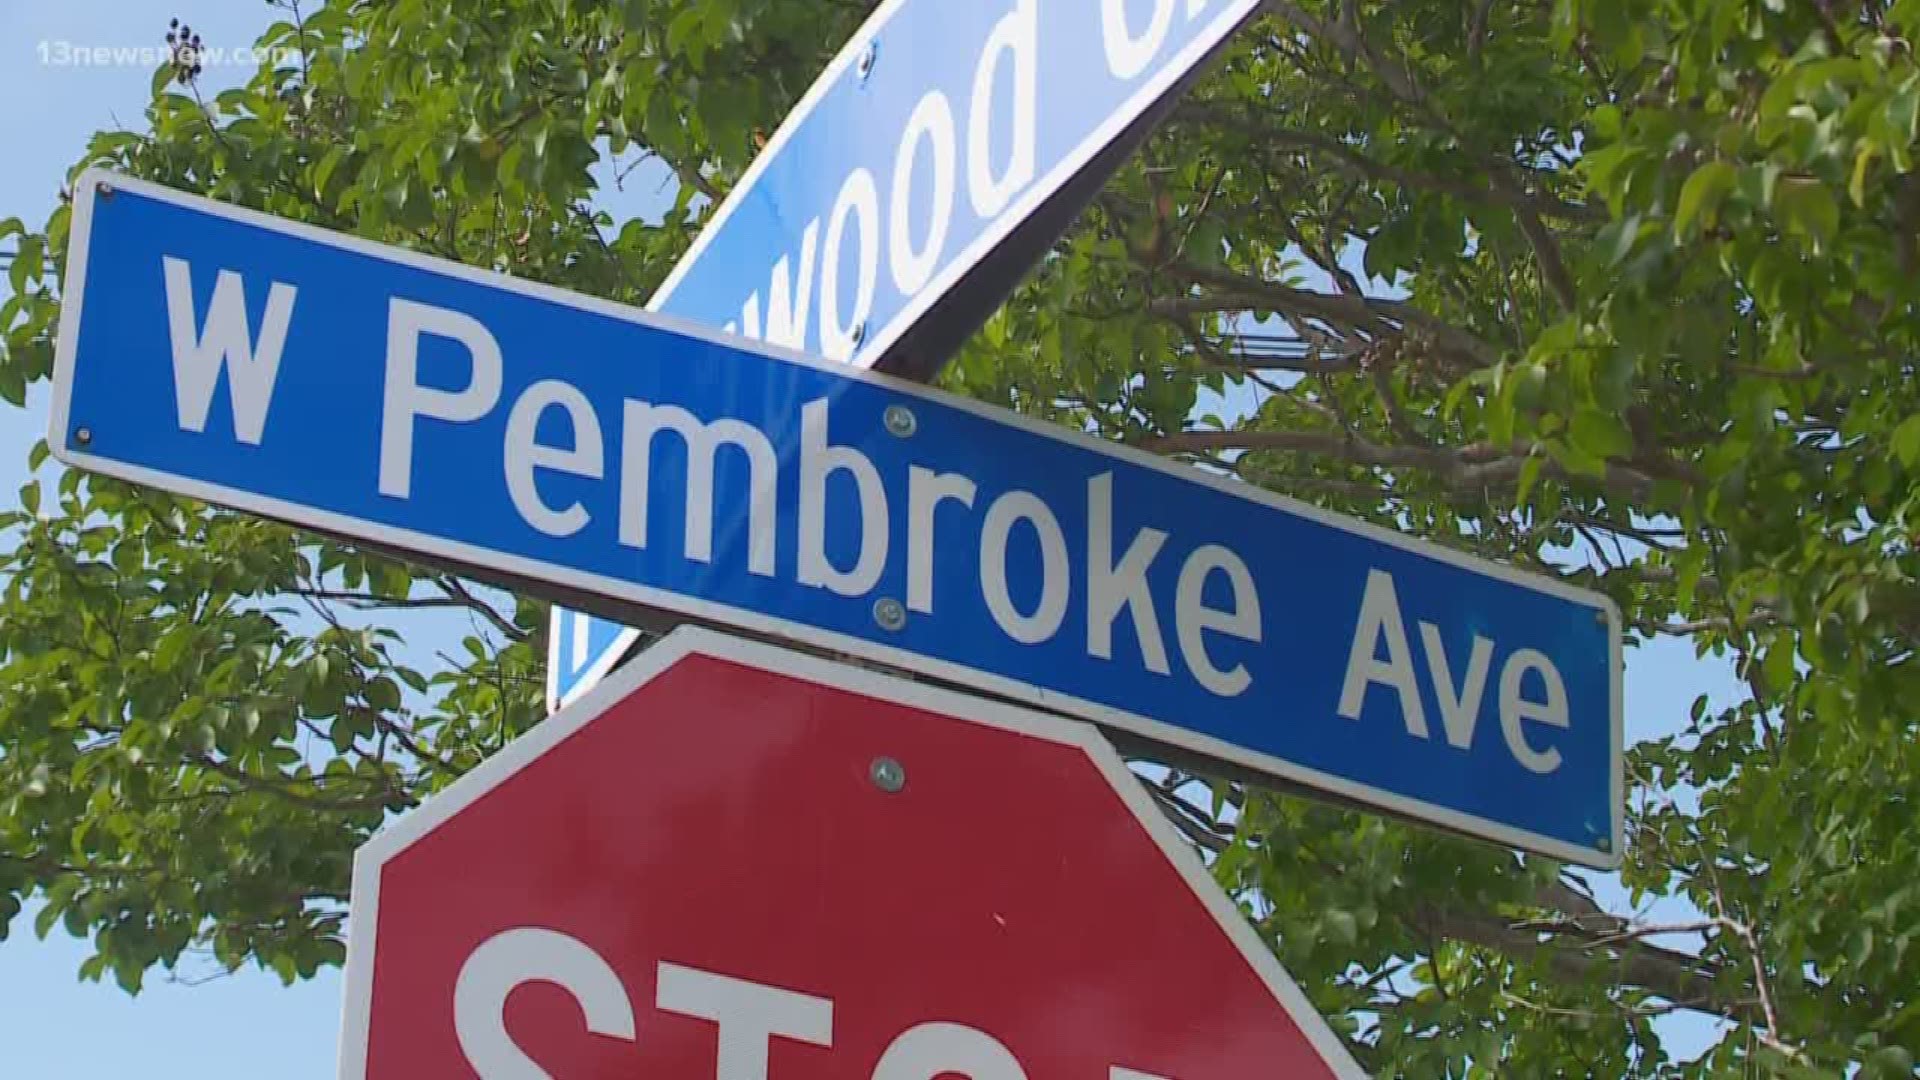 The shooting occurred off West Pembroke Avenue. The 29-year-old man was taken to the hospital with serious injuries.